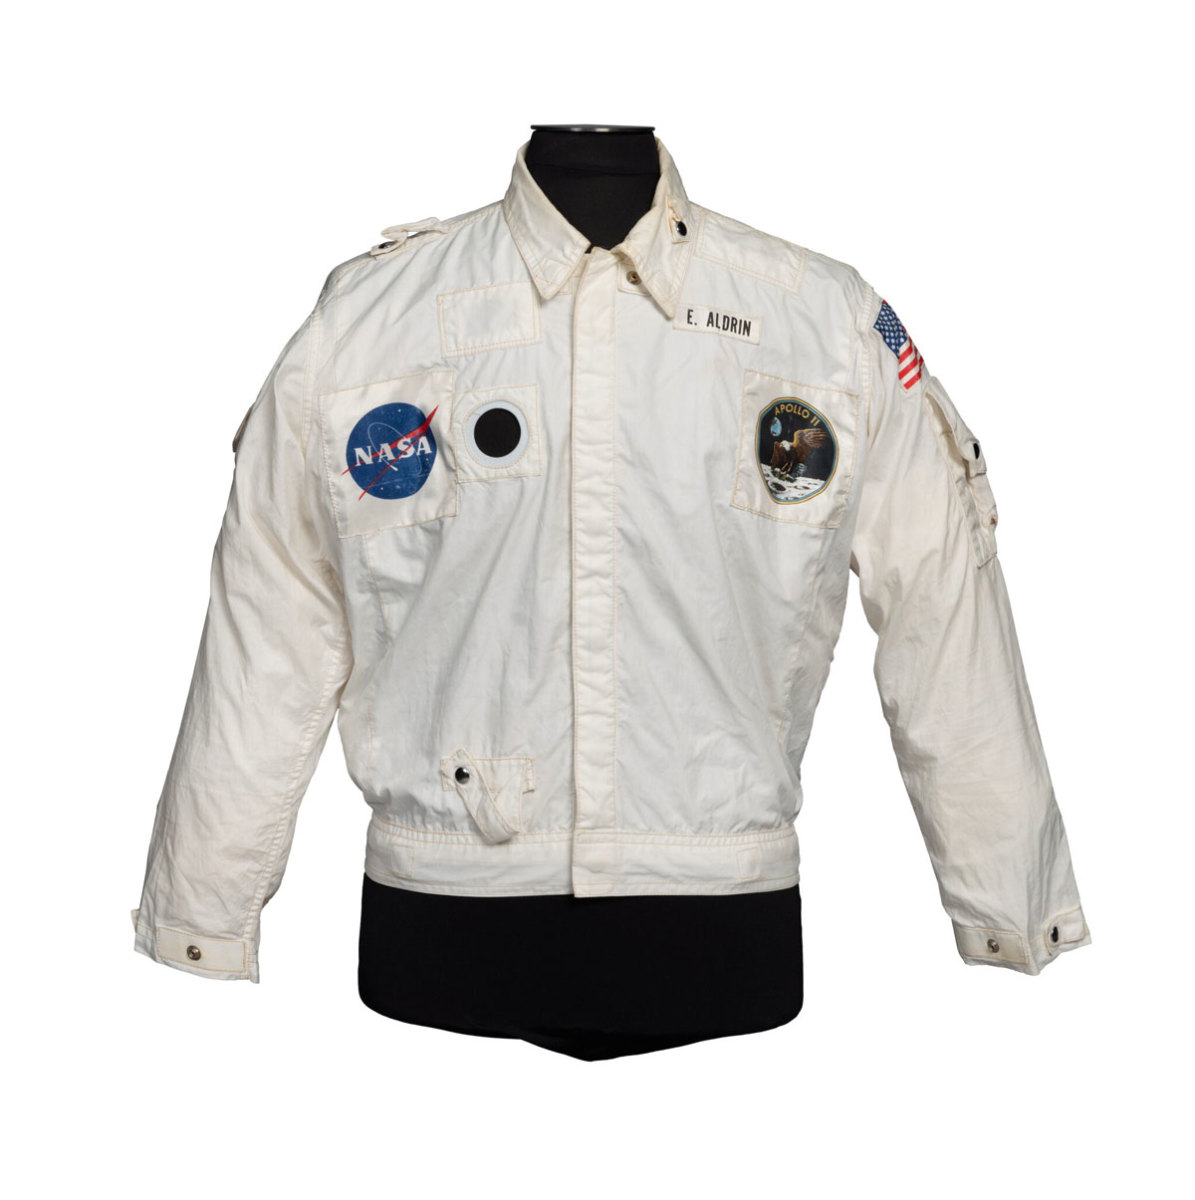 This Apollo 11 moon jacket that astronaut Buzz Aldrin wore sold for a record $2.8 million at Sotheby's on July 26.